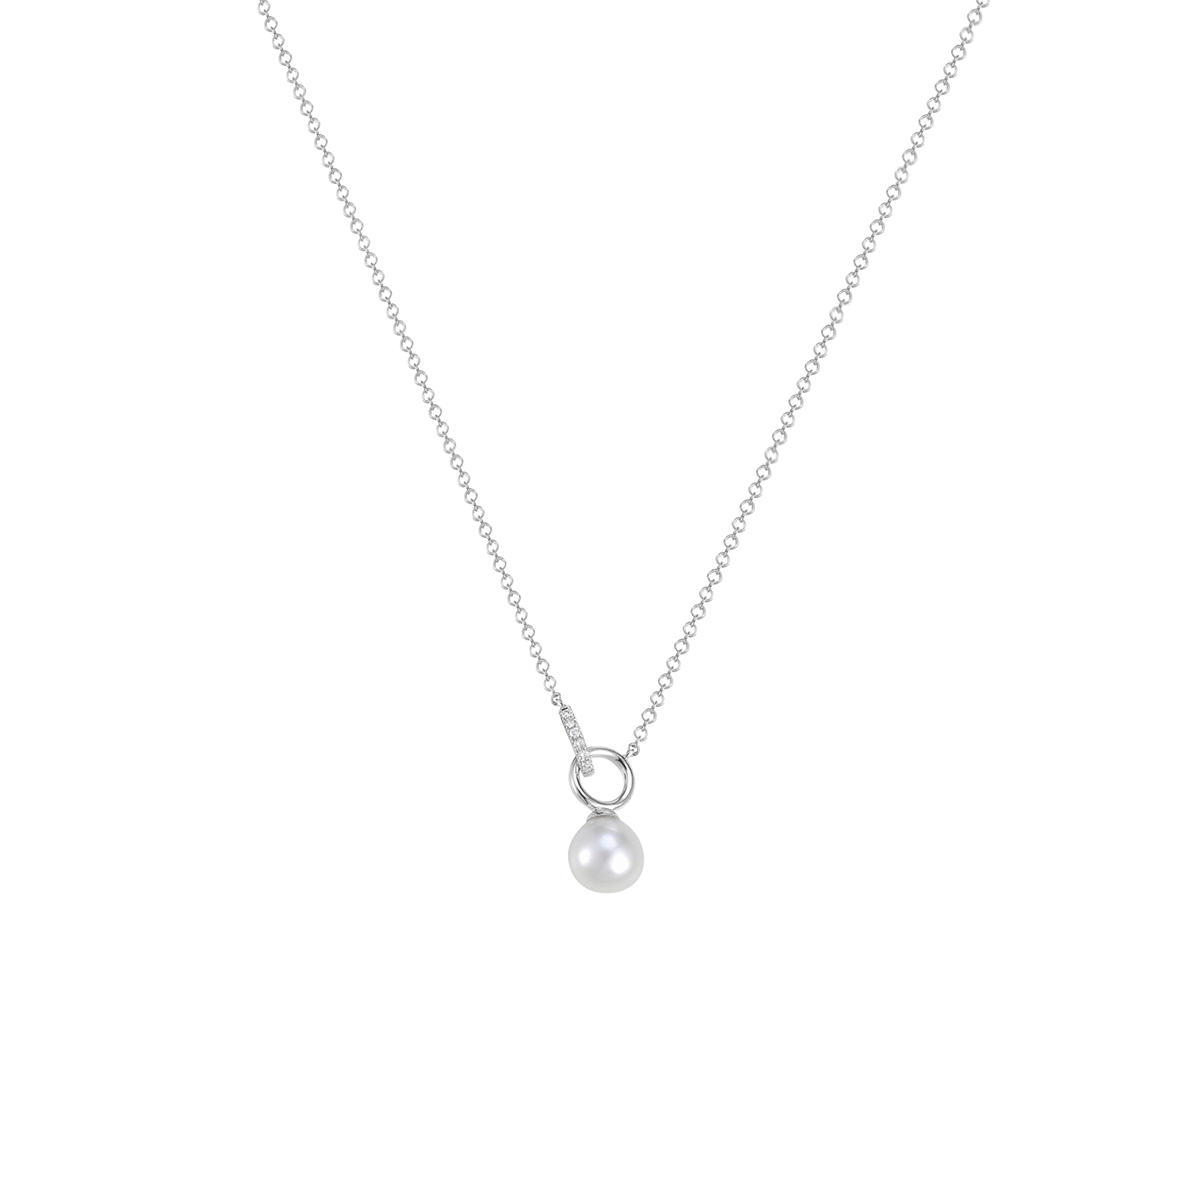 14K White Gold Freshwater Pearl and Diamond Necklace